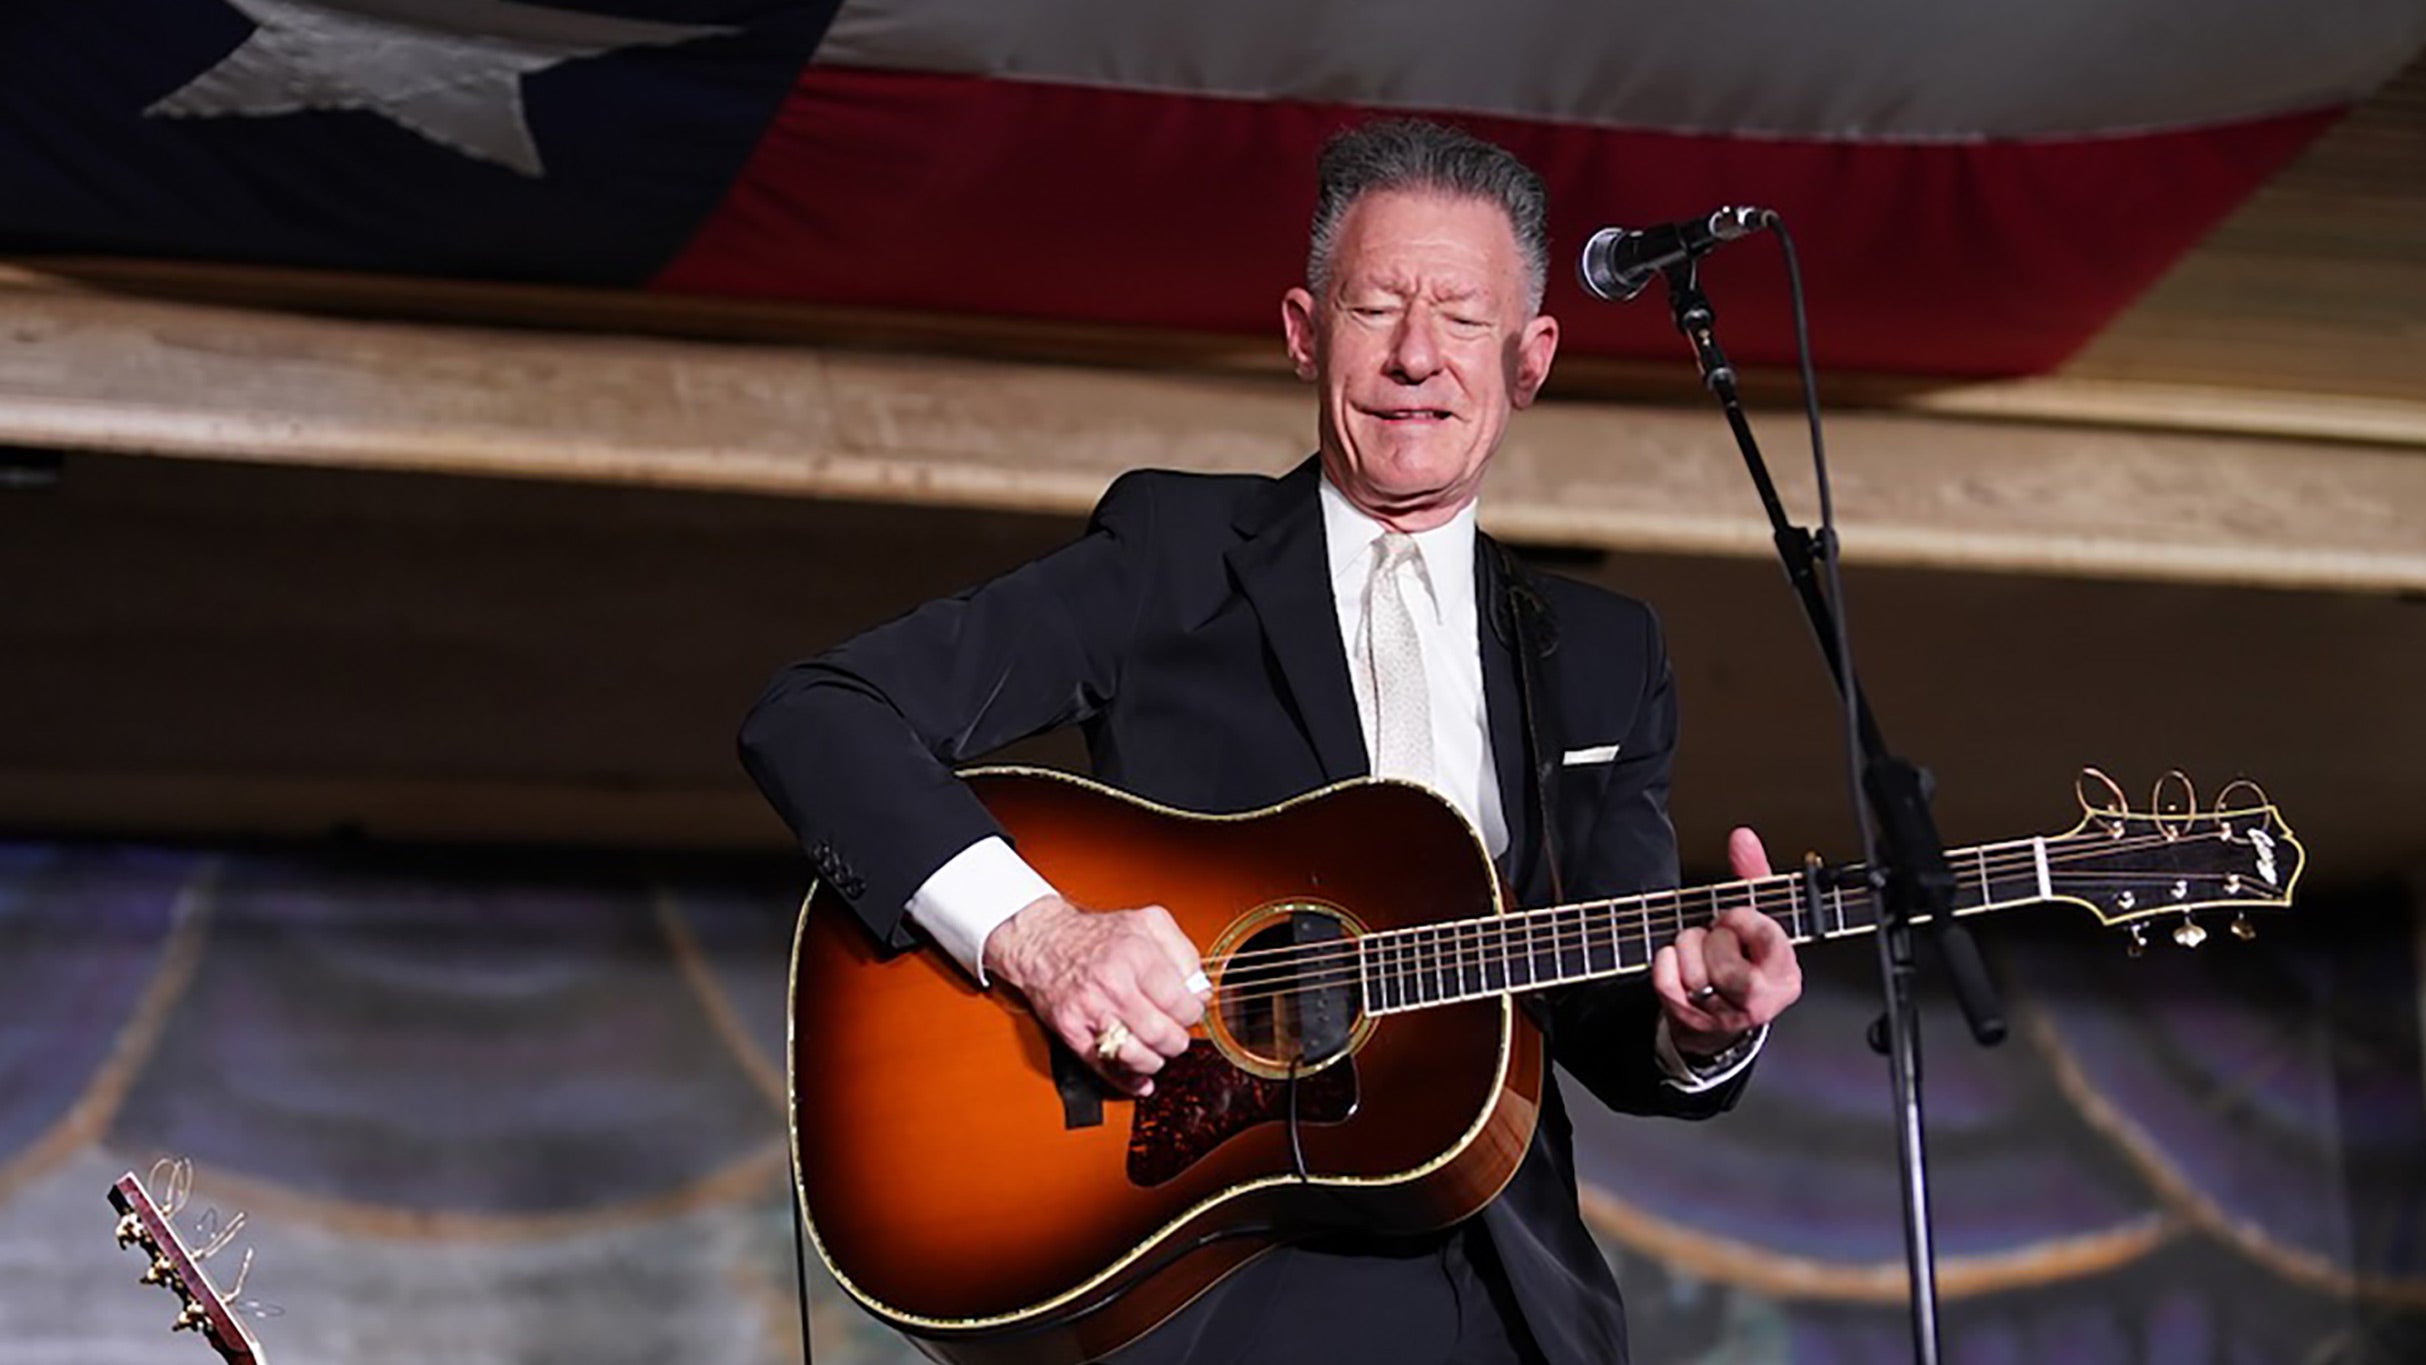 Lyle Lovett and his Acoustic Group in Napa promo photo for Headliner presale offer code